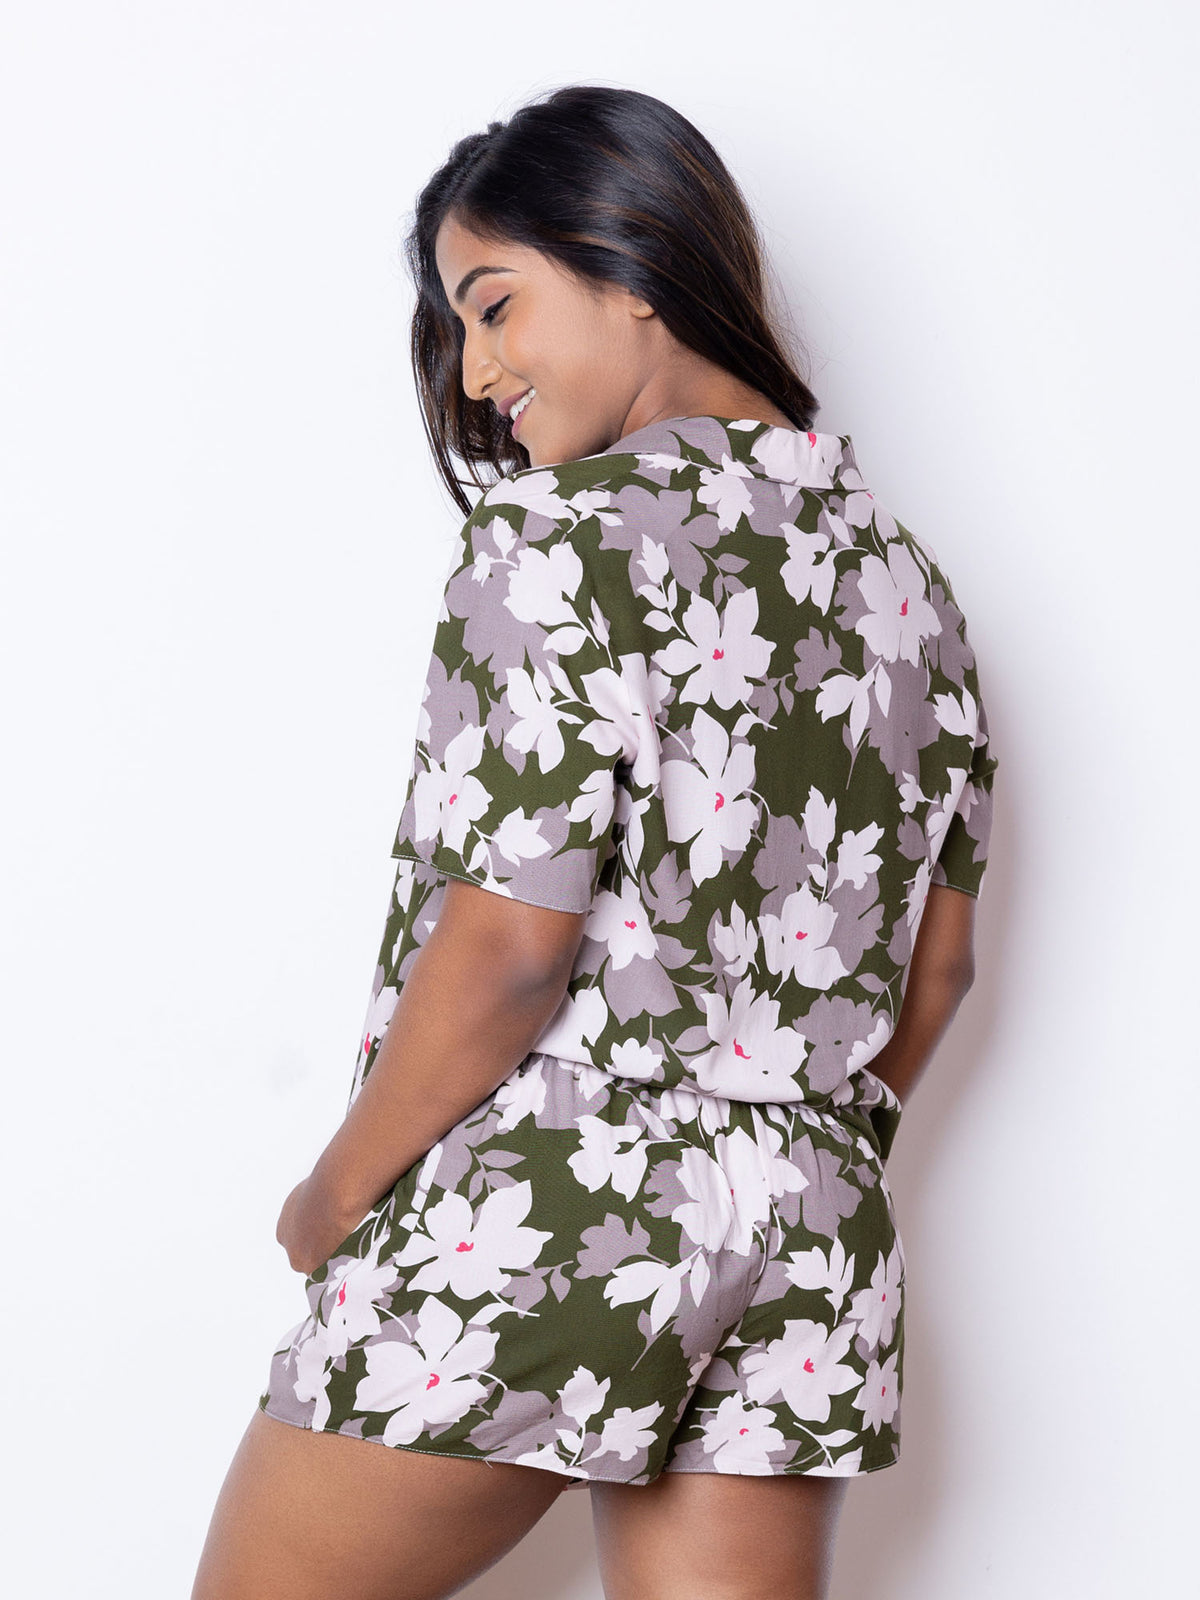 Valarie - Short Sleeve Classic SPJ Set in Camo Floral